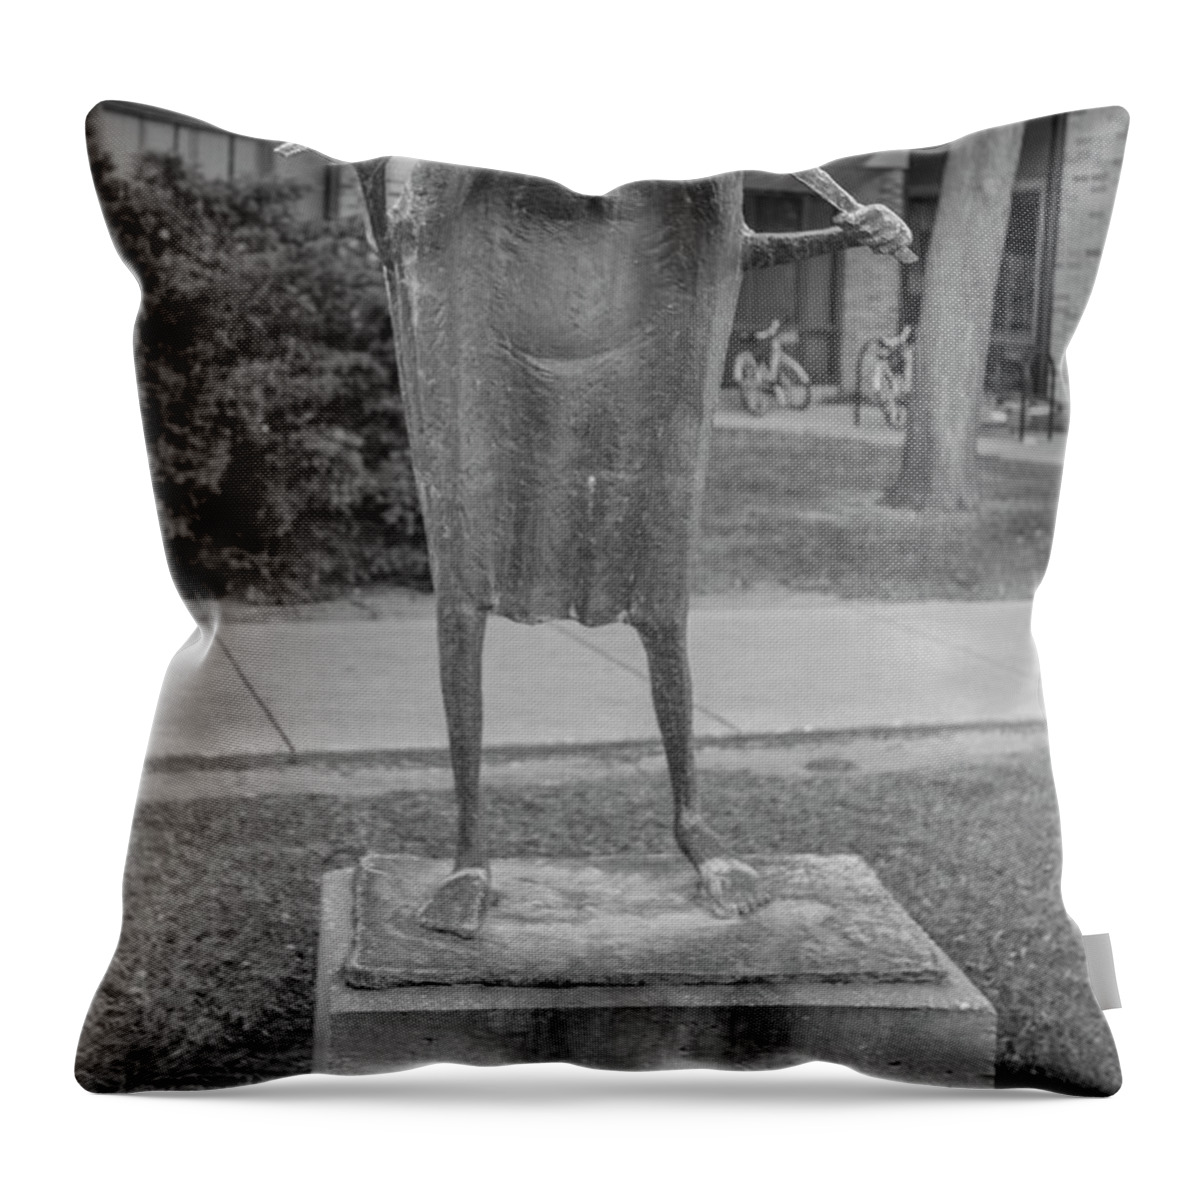 American University Throw Pillow featuring the photograph Sculpture Notre Dame Black and White by John McGraw